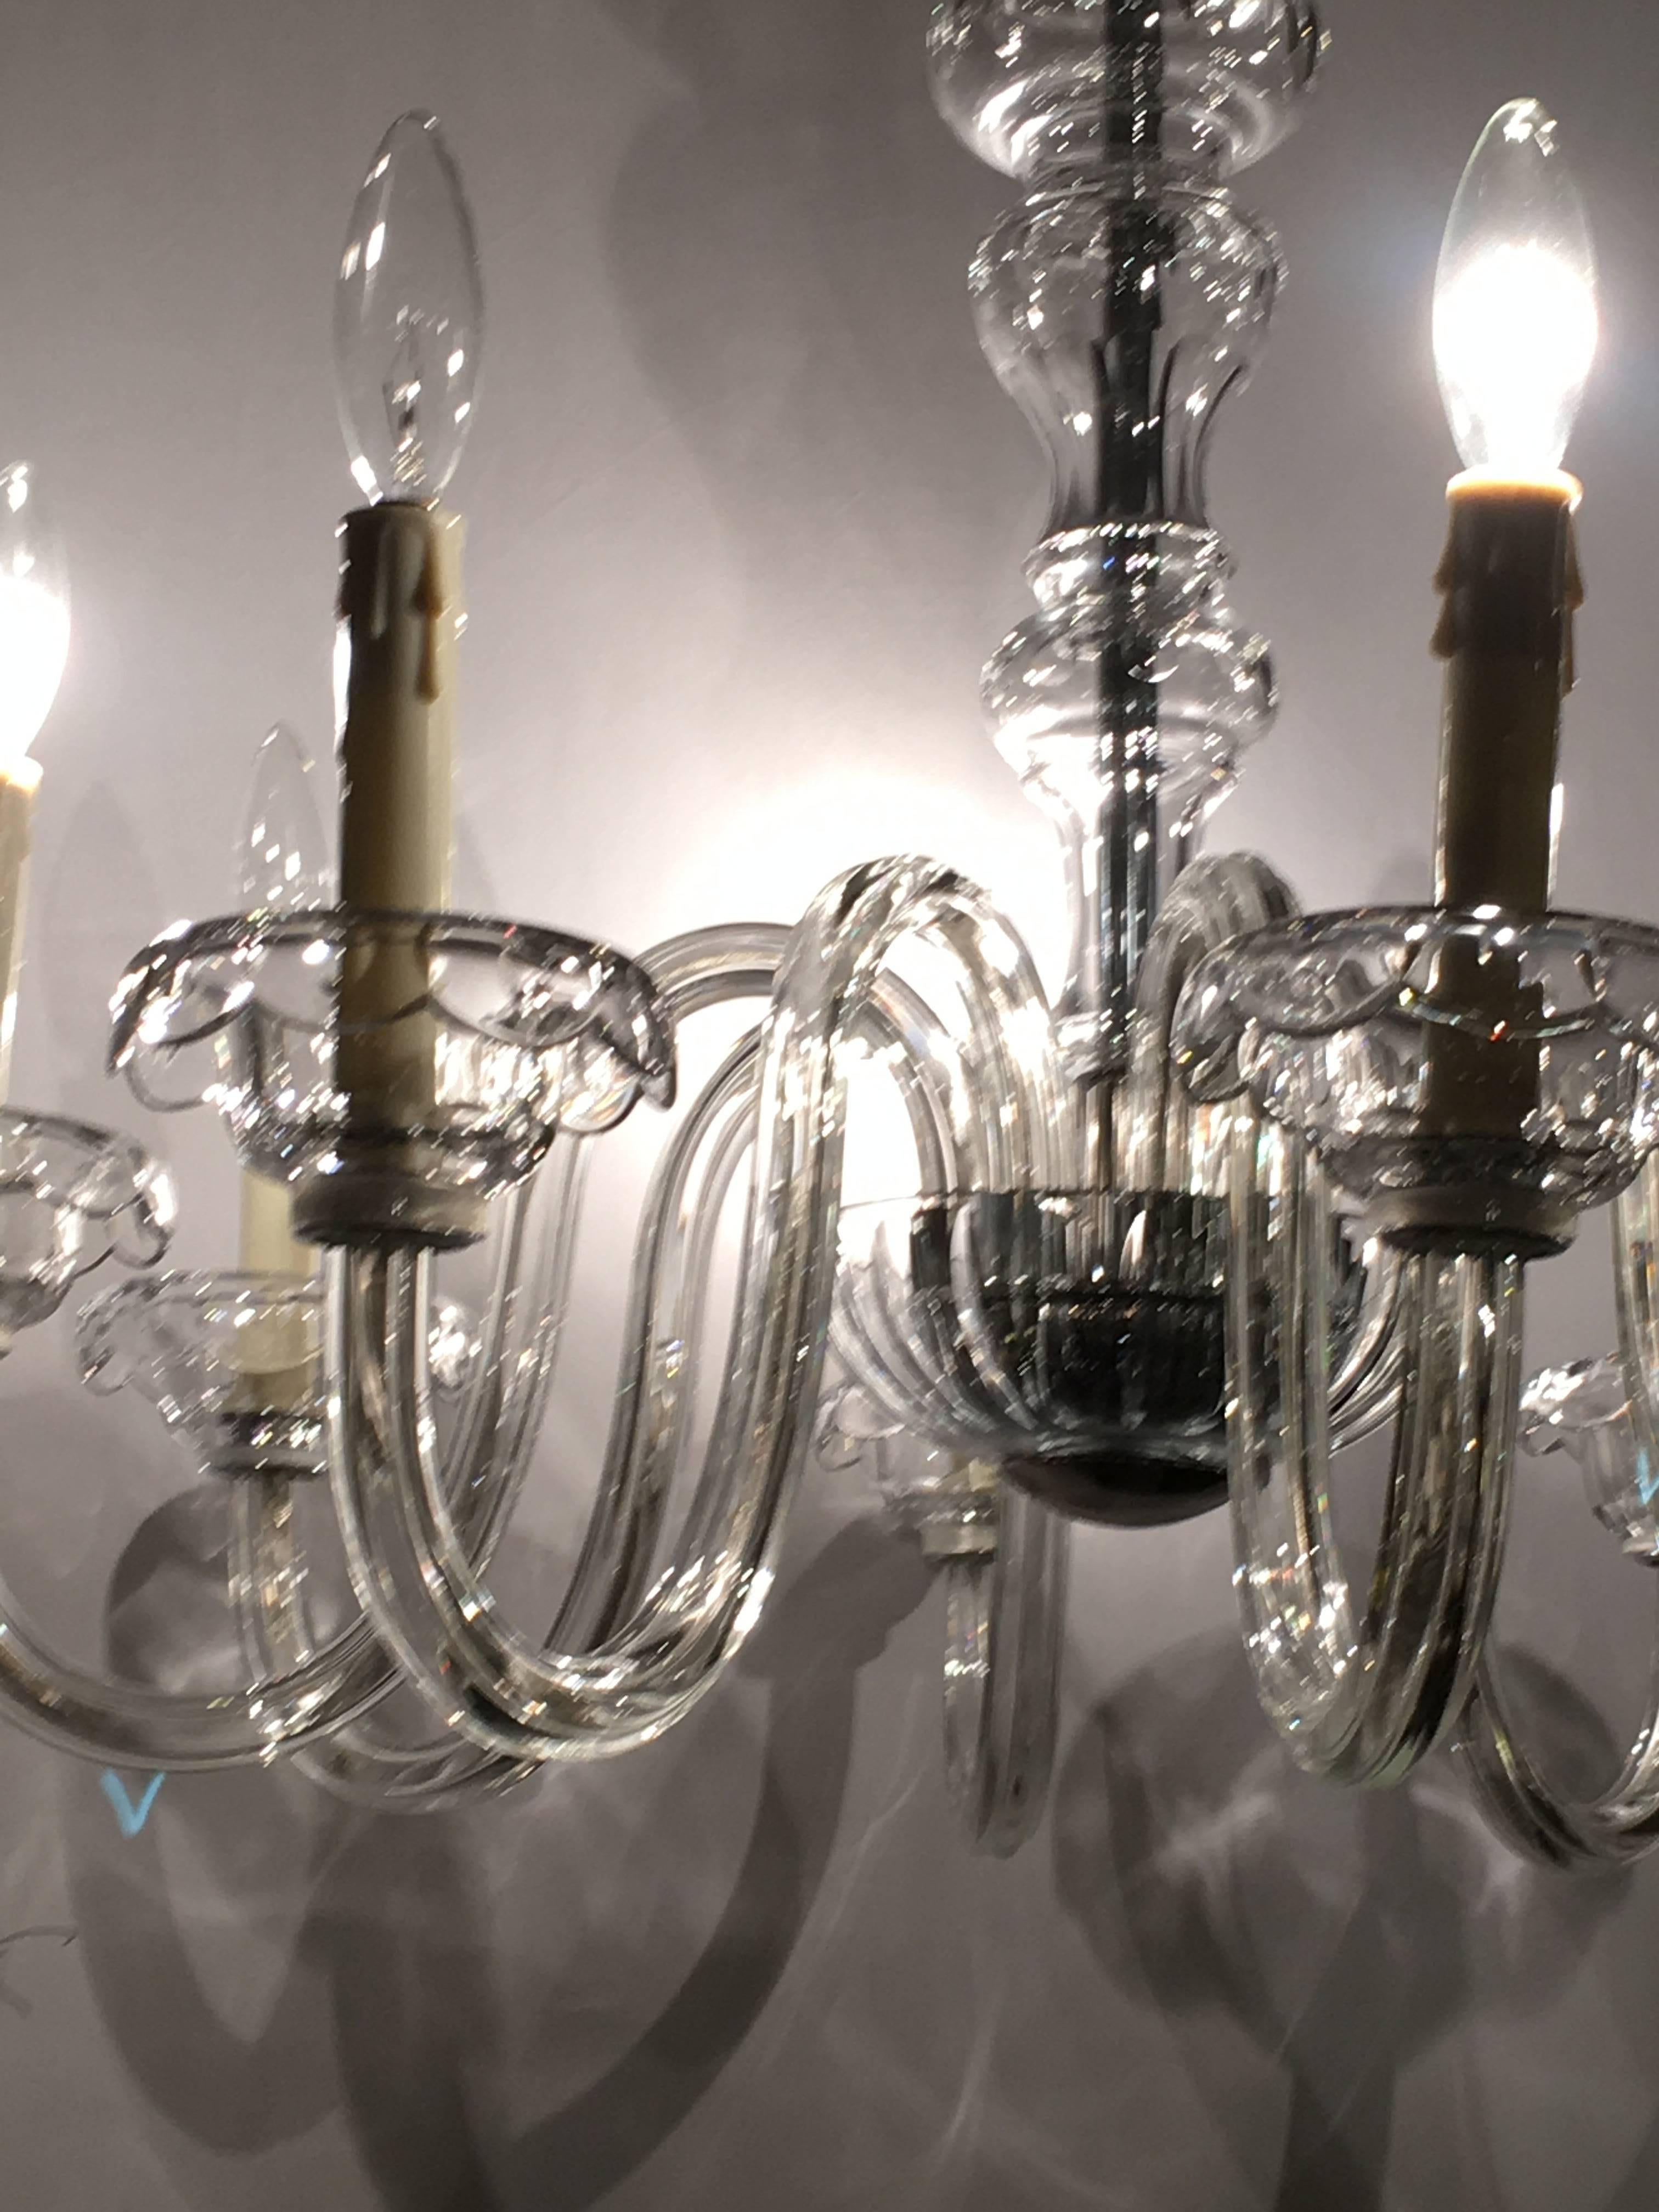 Traditional Georgian style crystal chandelier. If simple and understated is what you are searching for, search no more. This elegant Georgian style chandelier has no trimmings at all. The chrome-plated ceiling plate and chain flow wonderfully onto